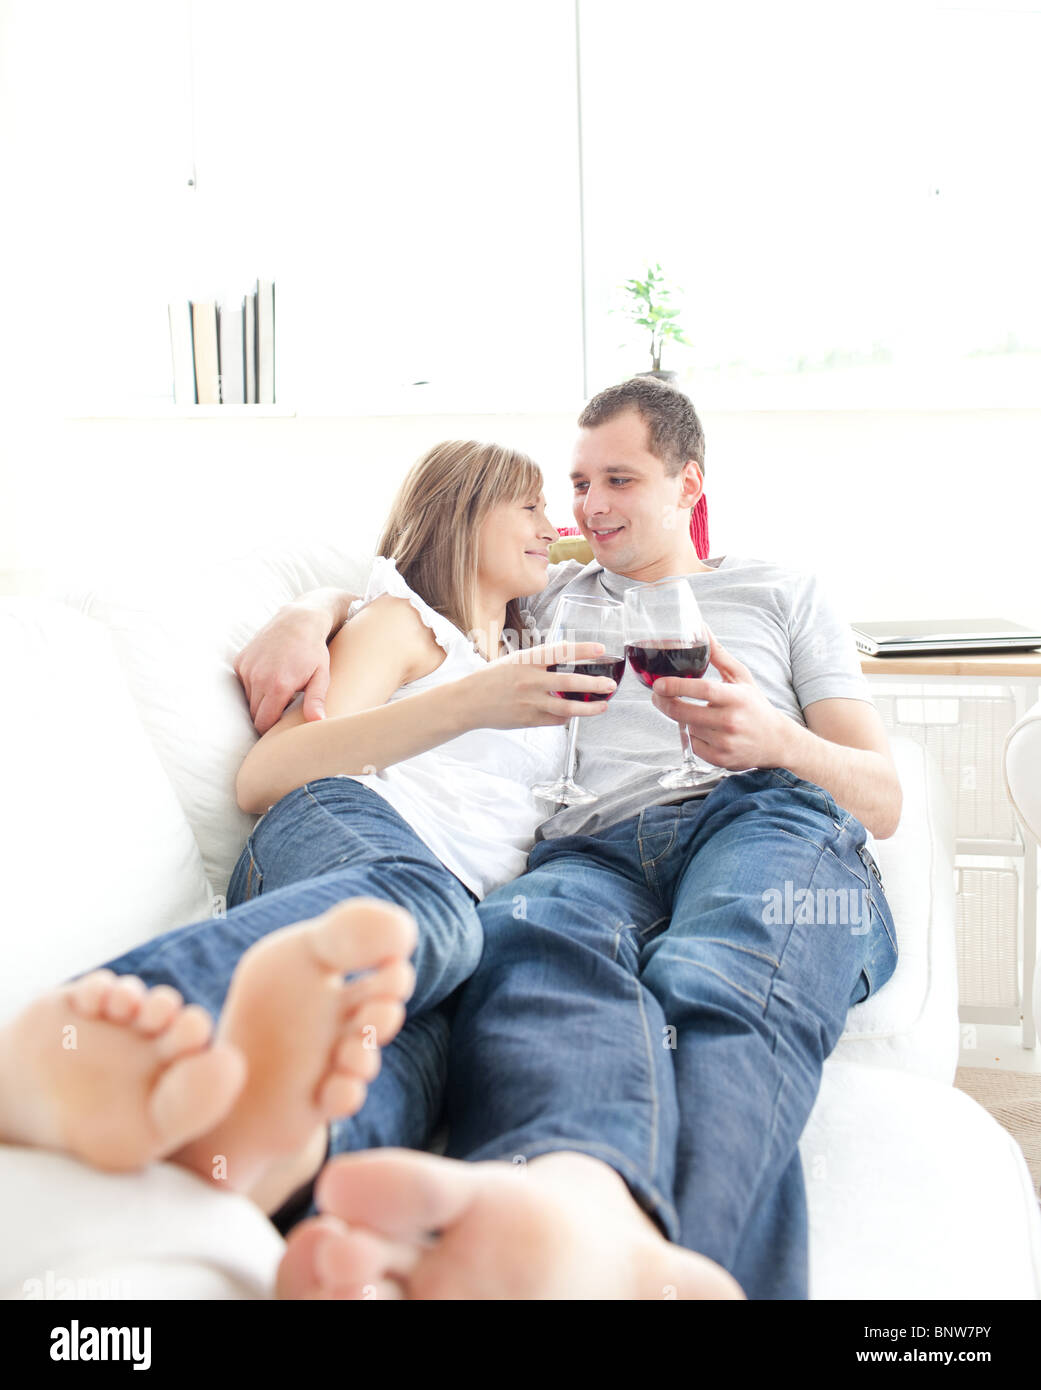 Adorable couple relaxing together Stock Photo